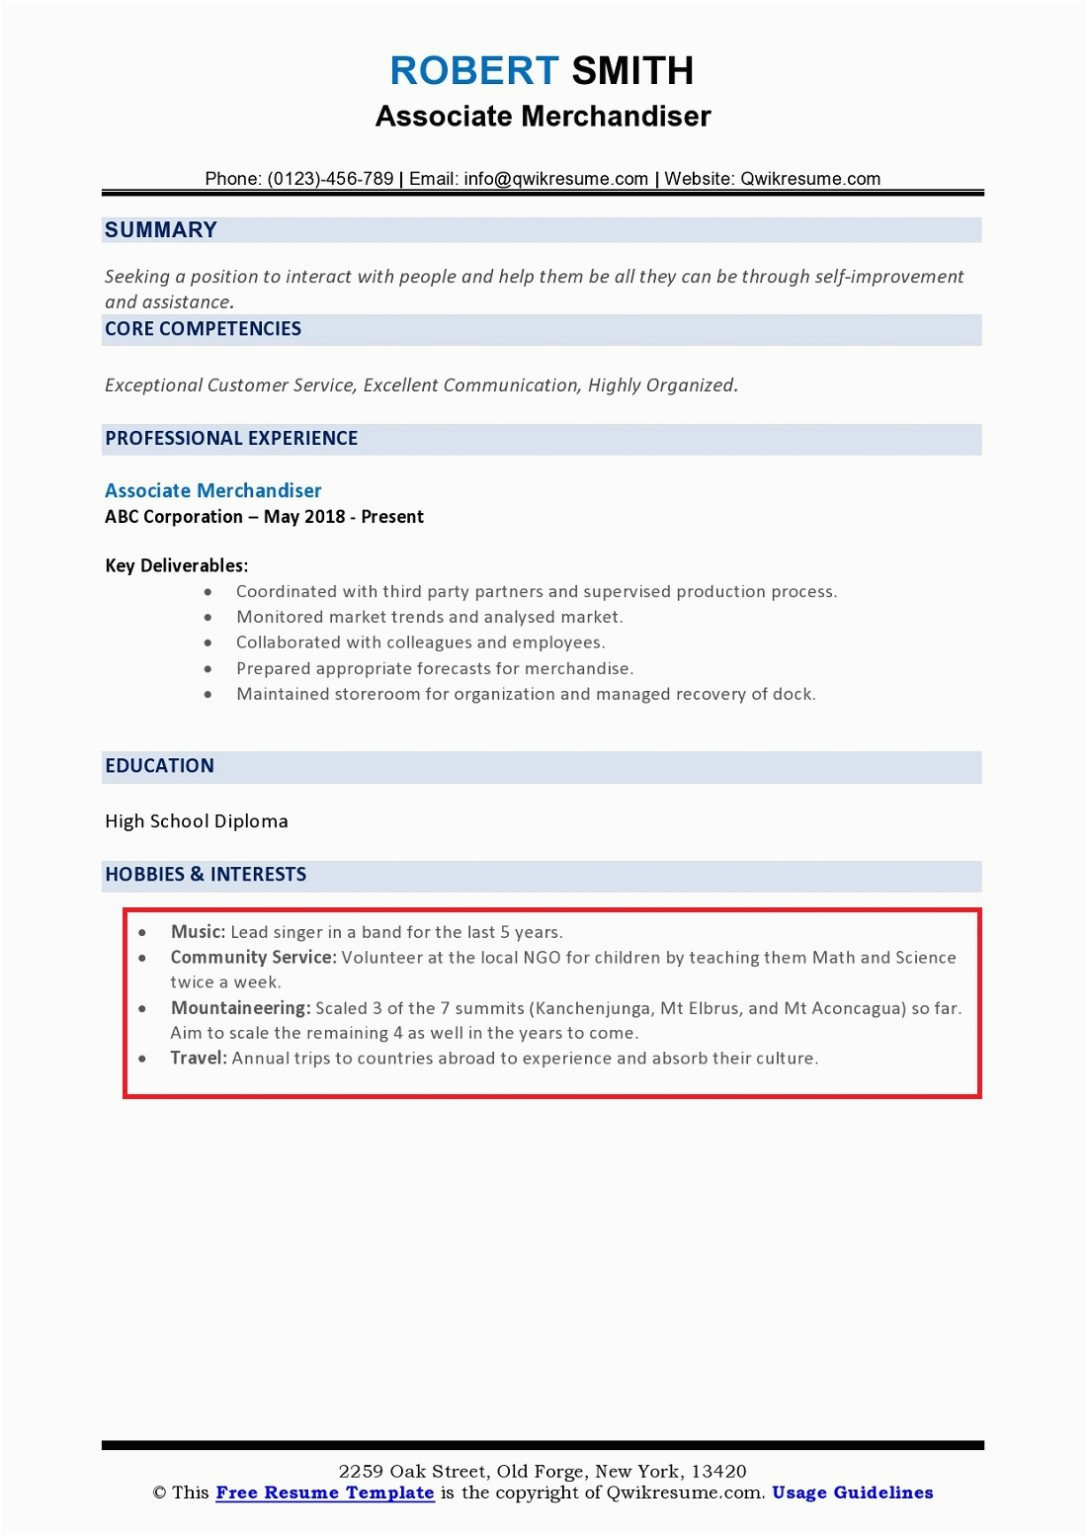 Sample Hobbies and Interests for Resume Hobbies and Interests On Resume How to List & Examples